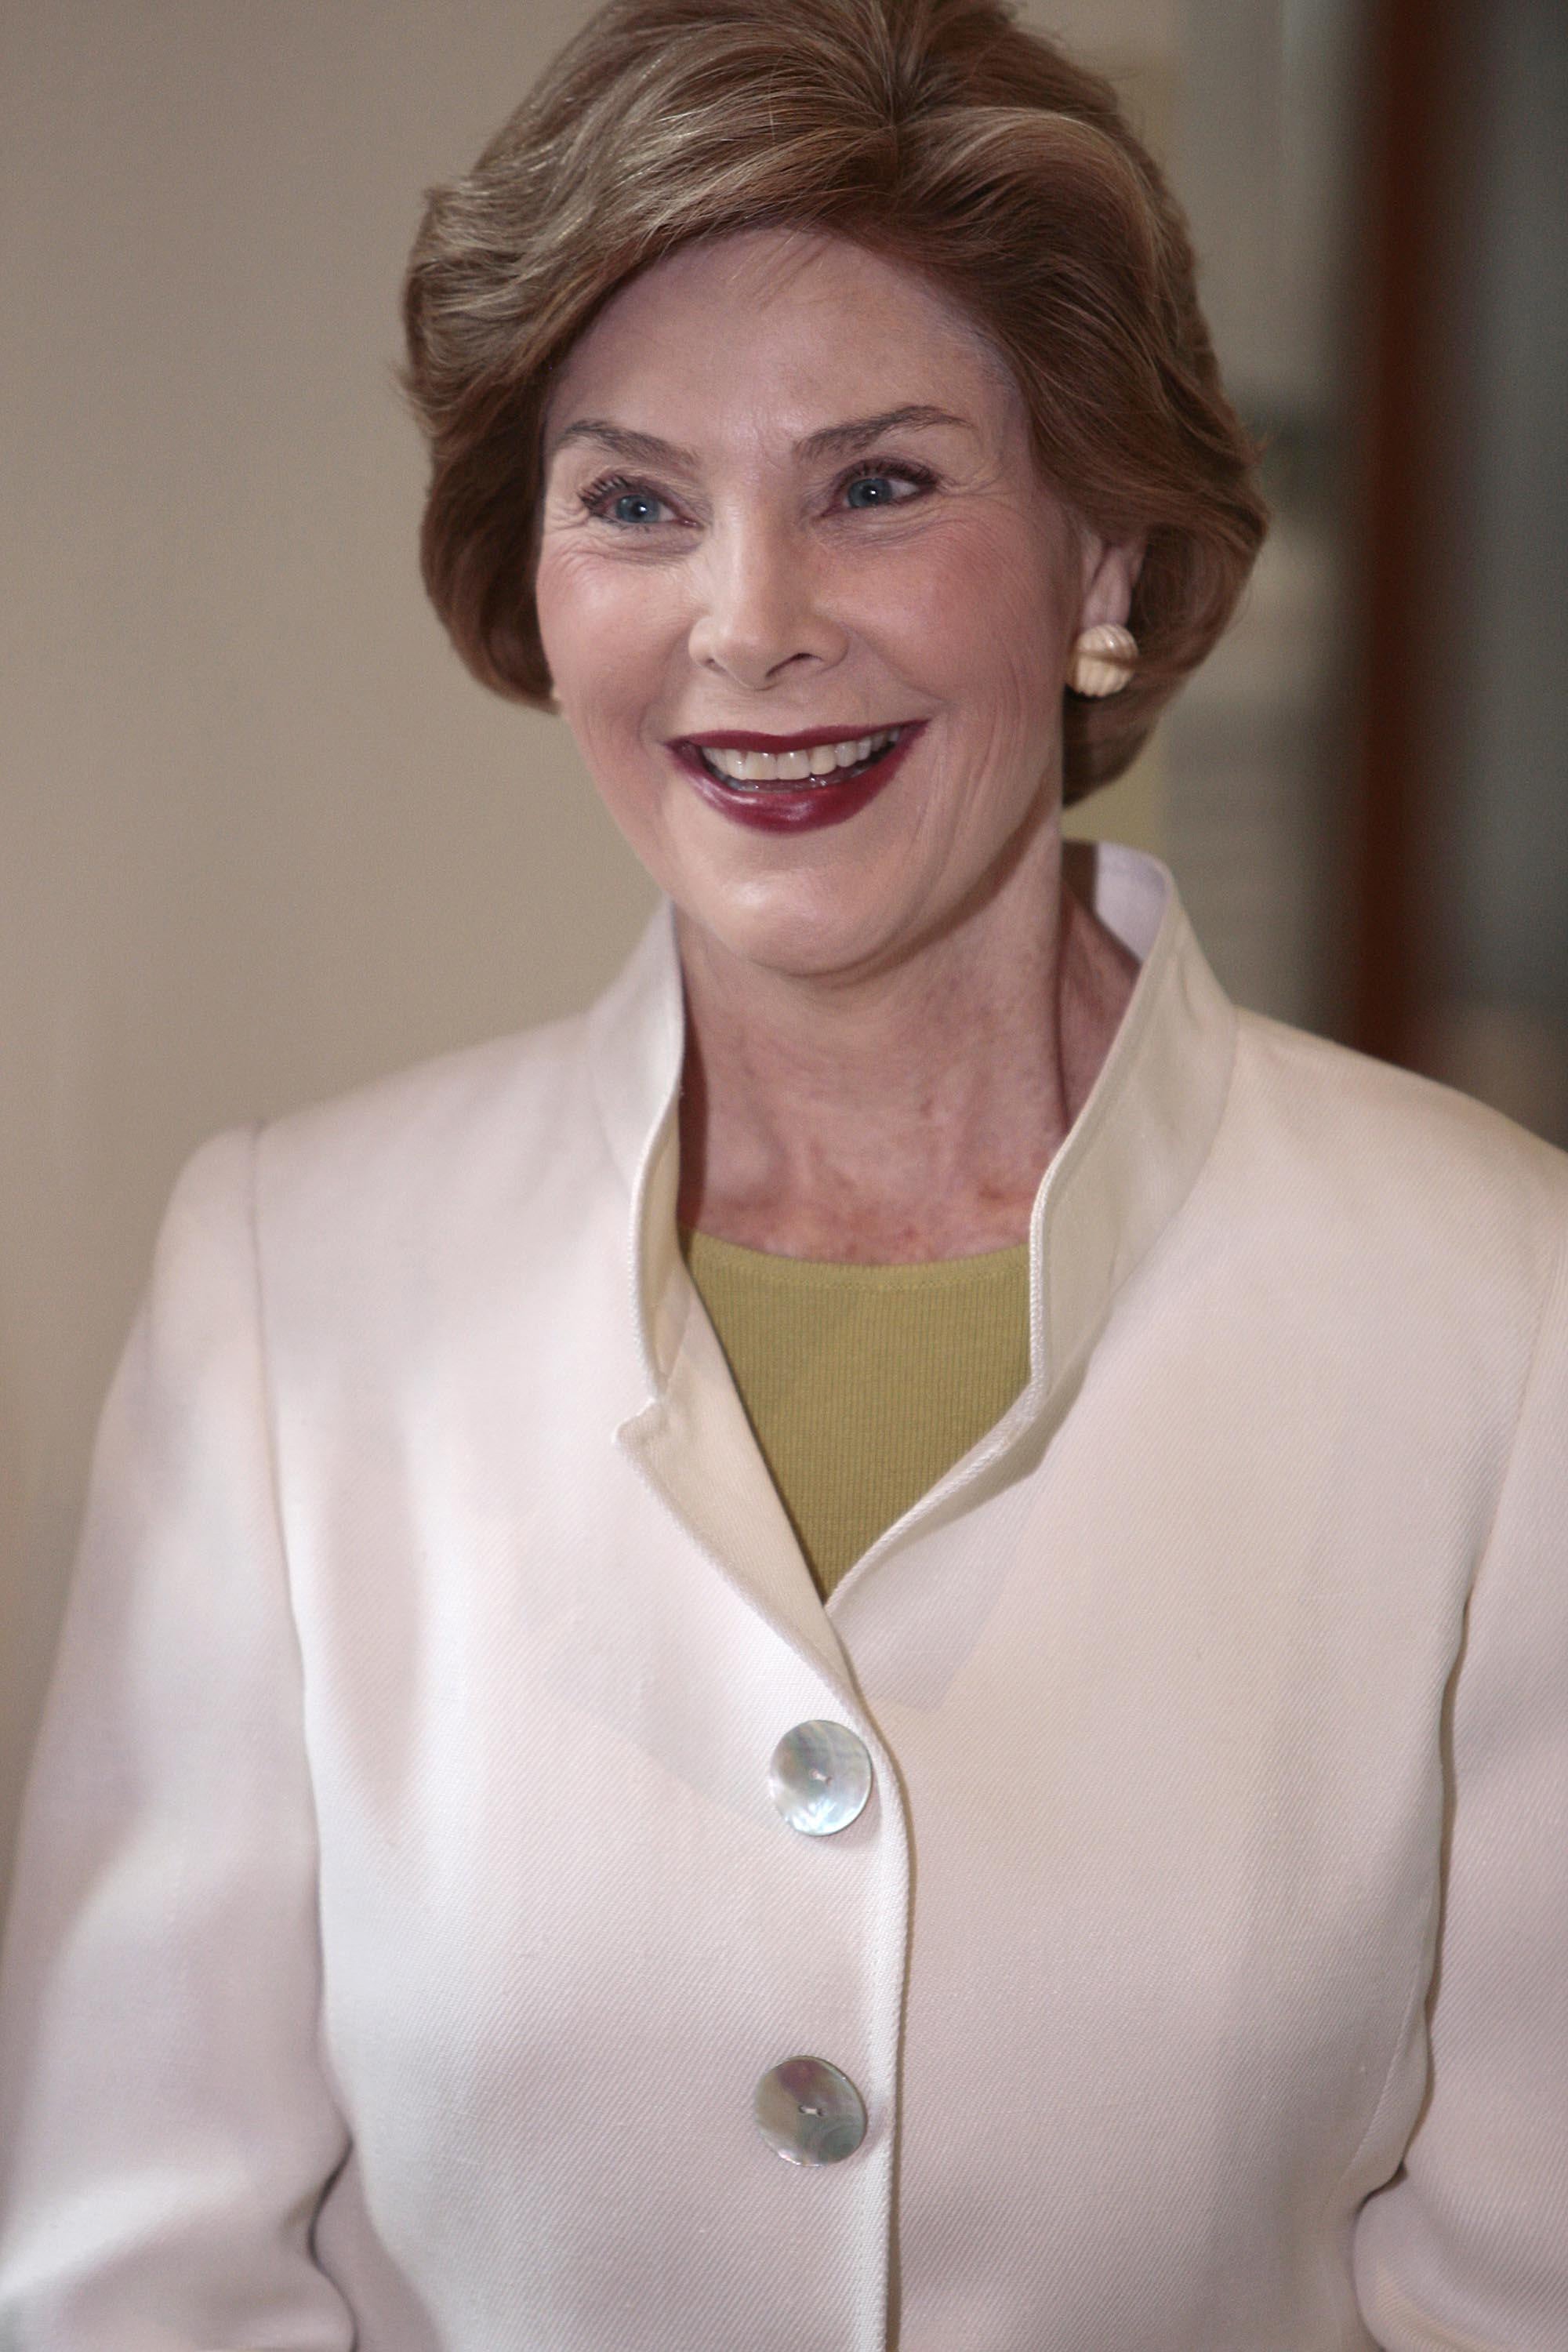 Laura Bush served as the first lady of the United States from 2001 to 2009.